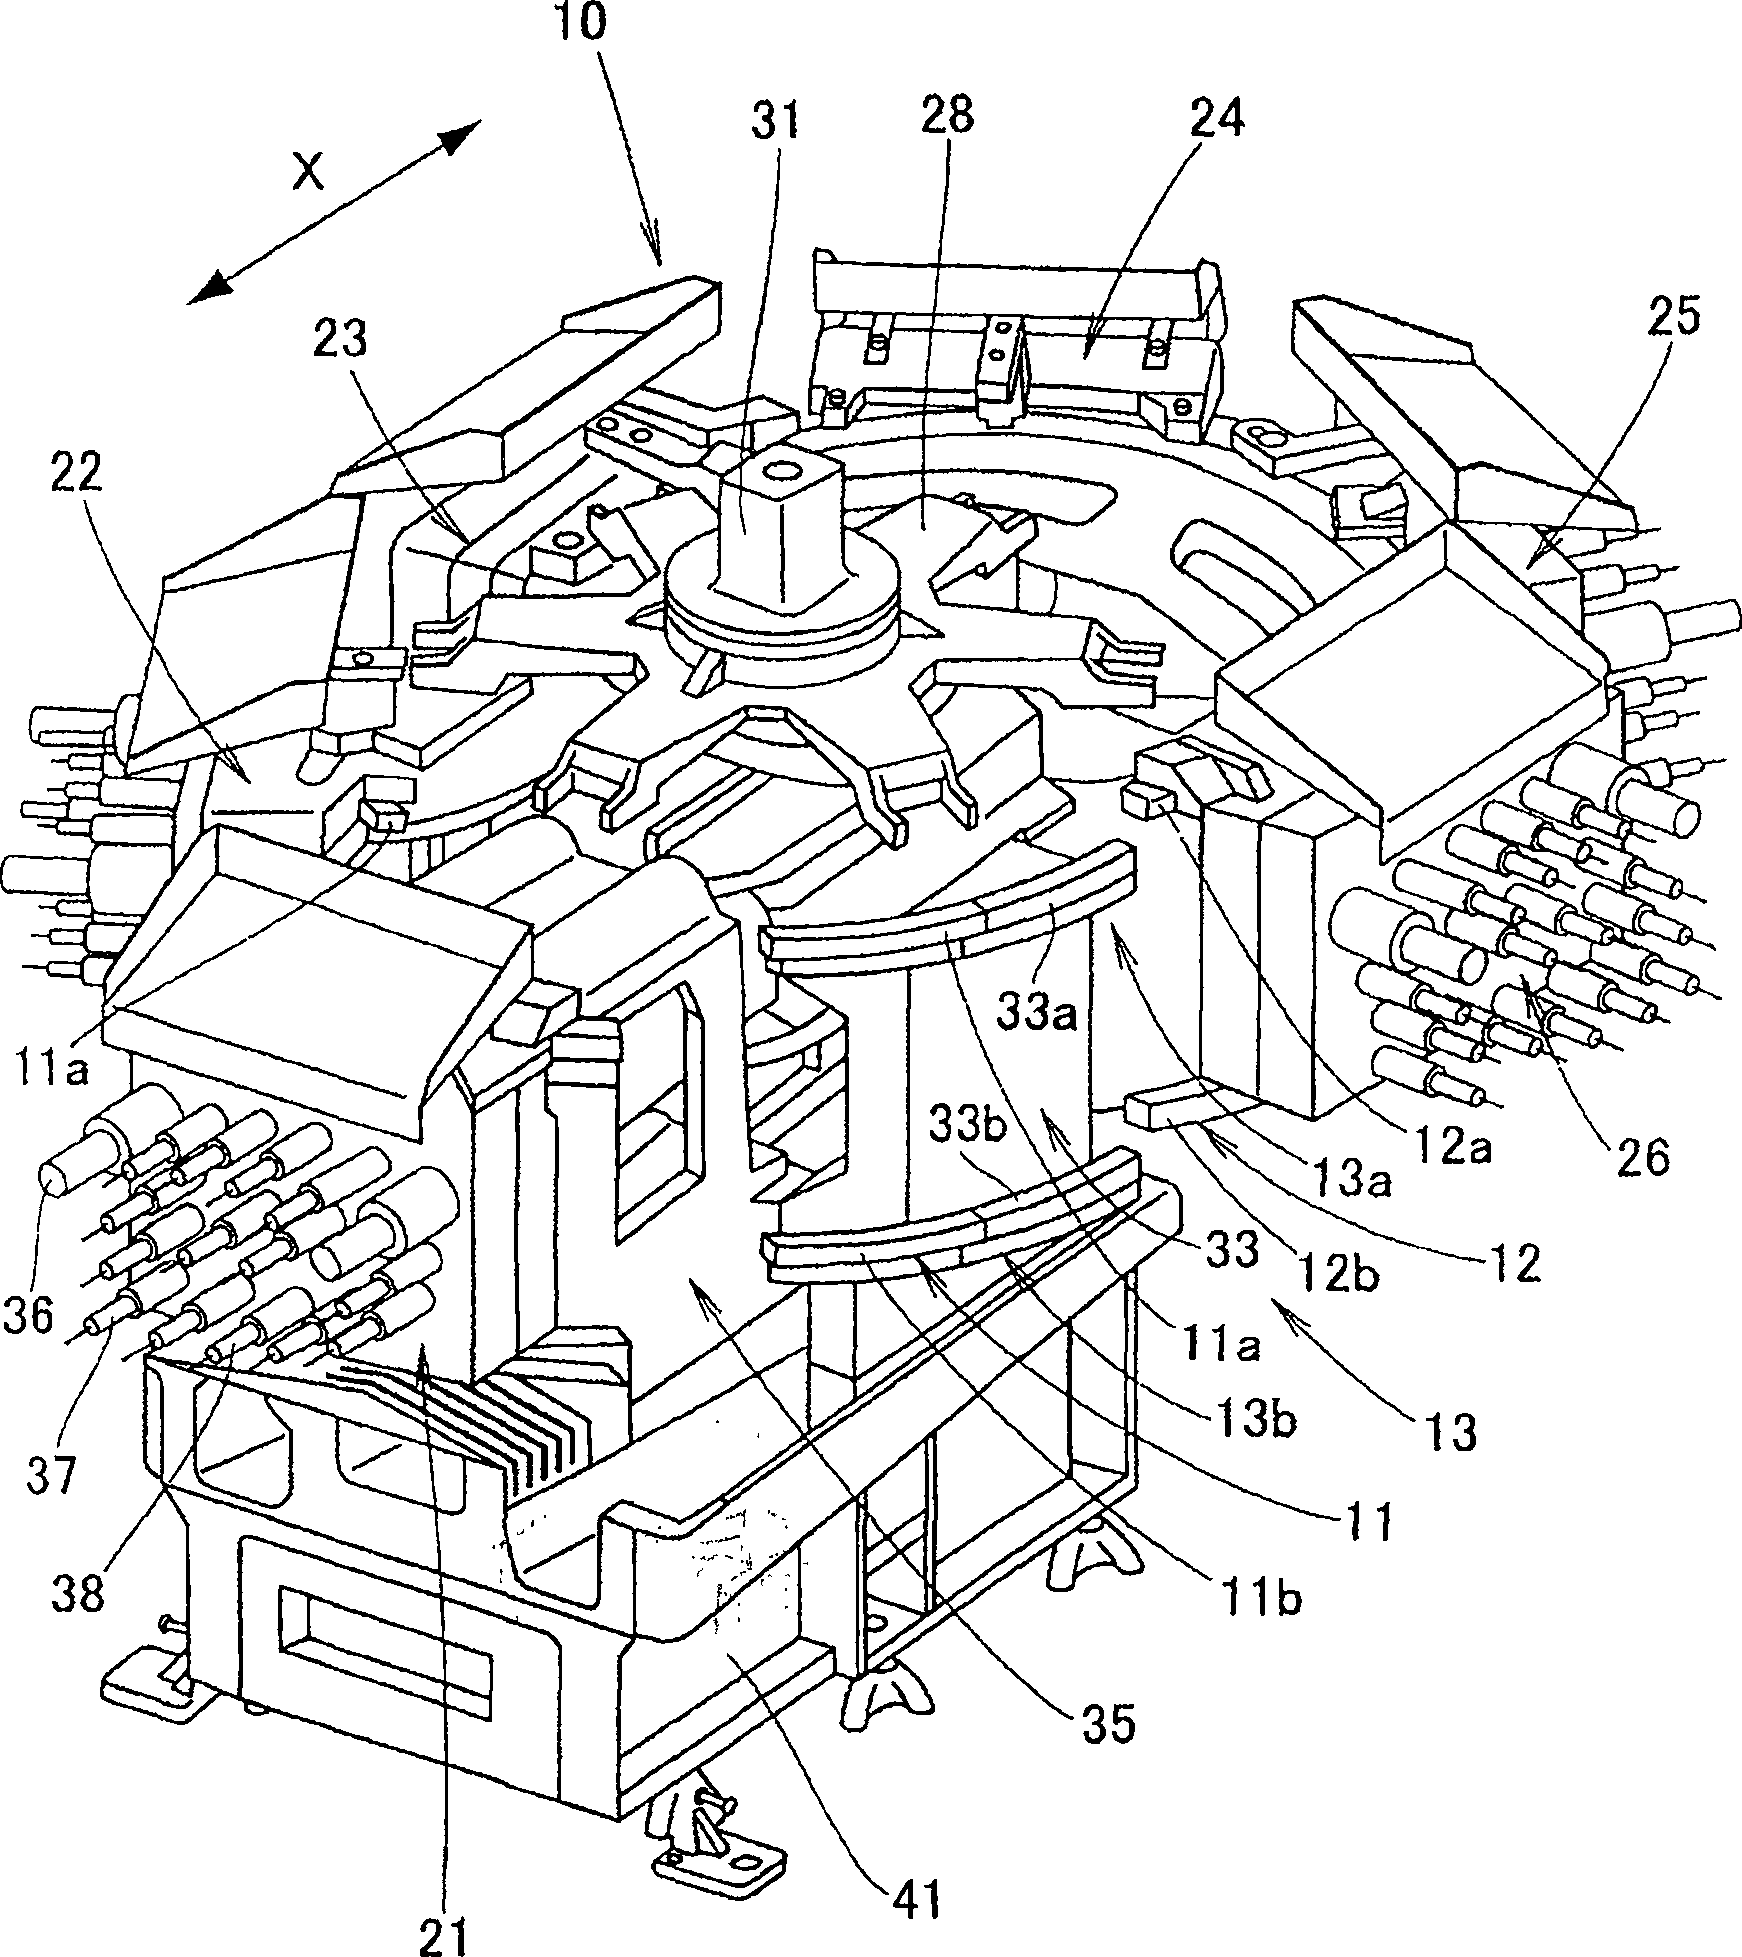 Multi-spindle head replacement type machine tool